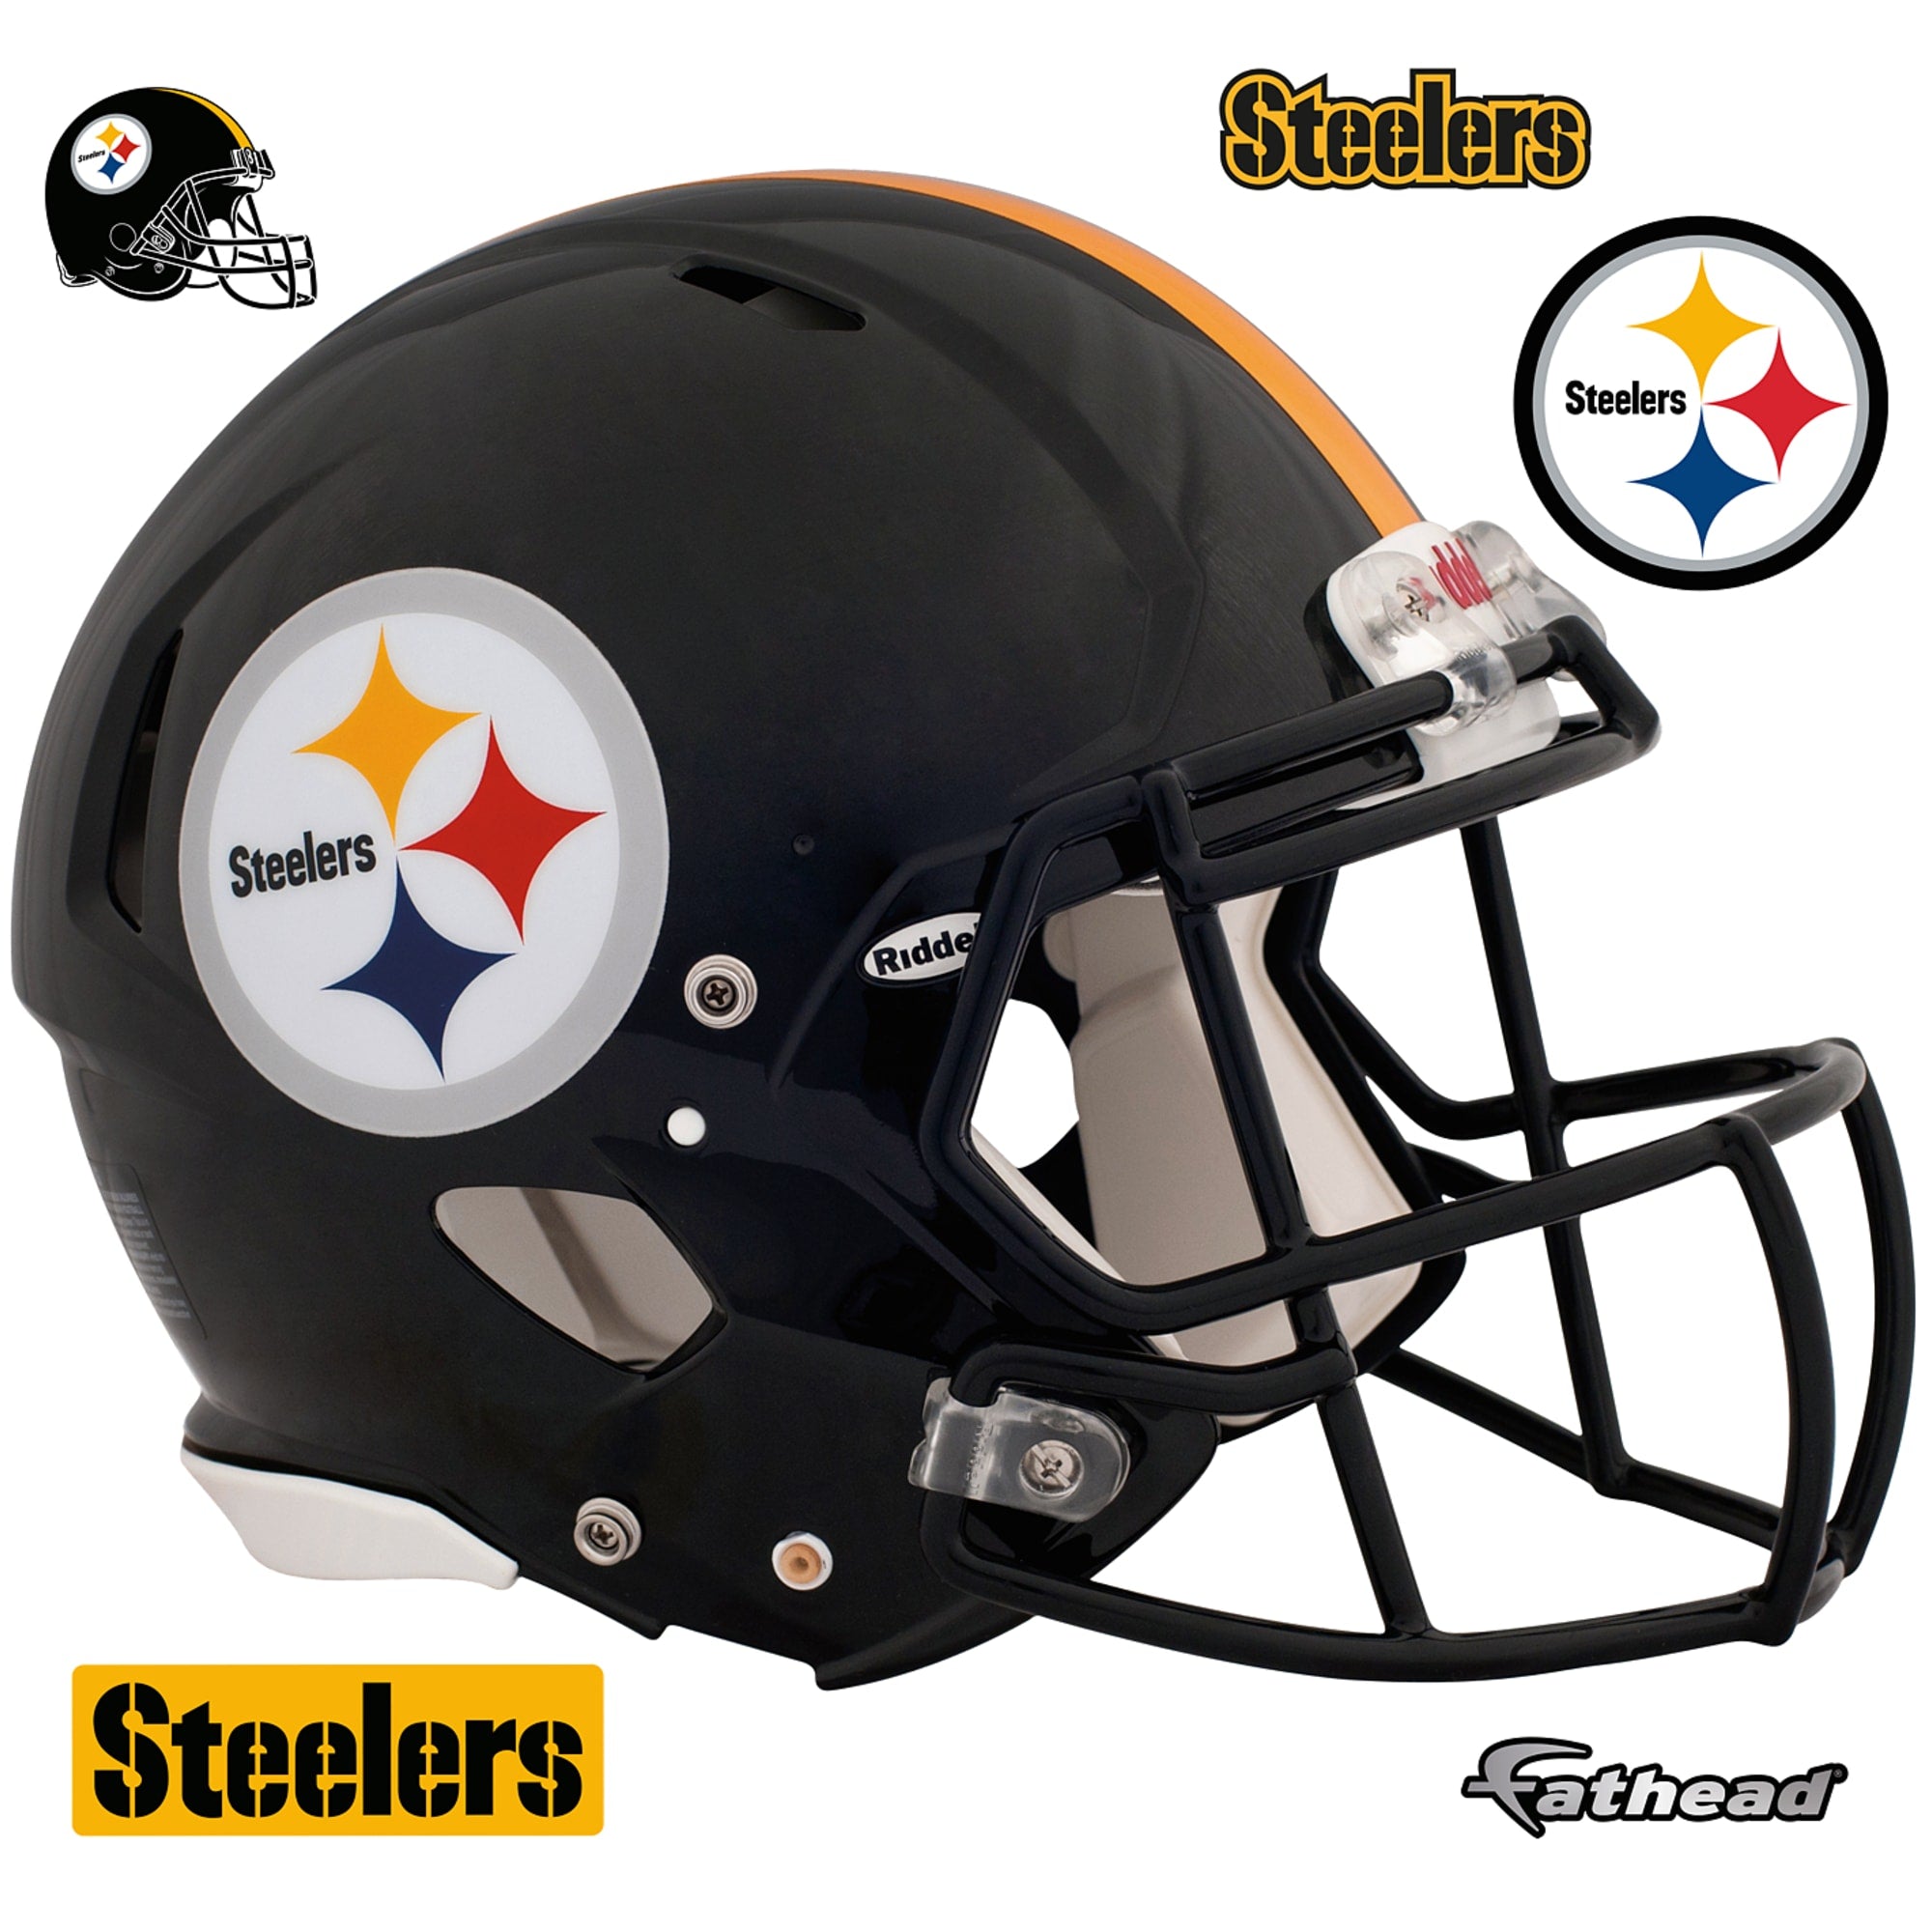 Fathead Pittsburgh Steelers Giant Removable Helmet Wall Decal